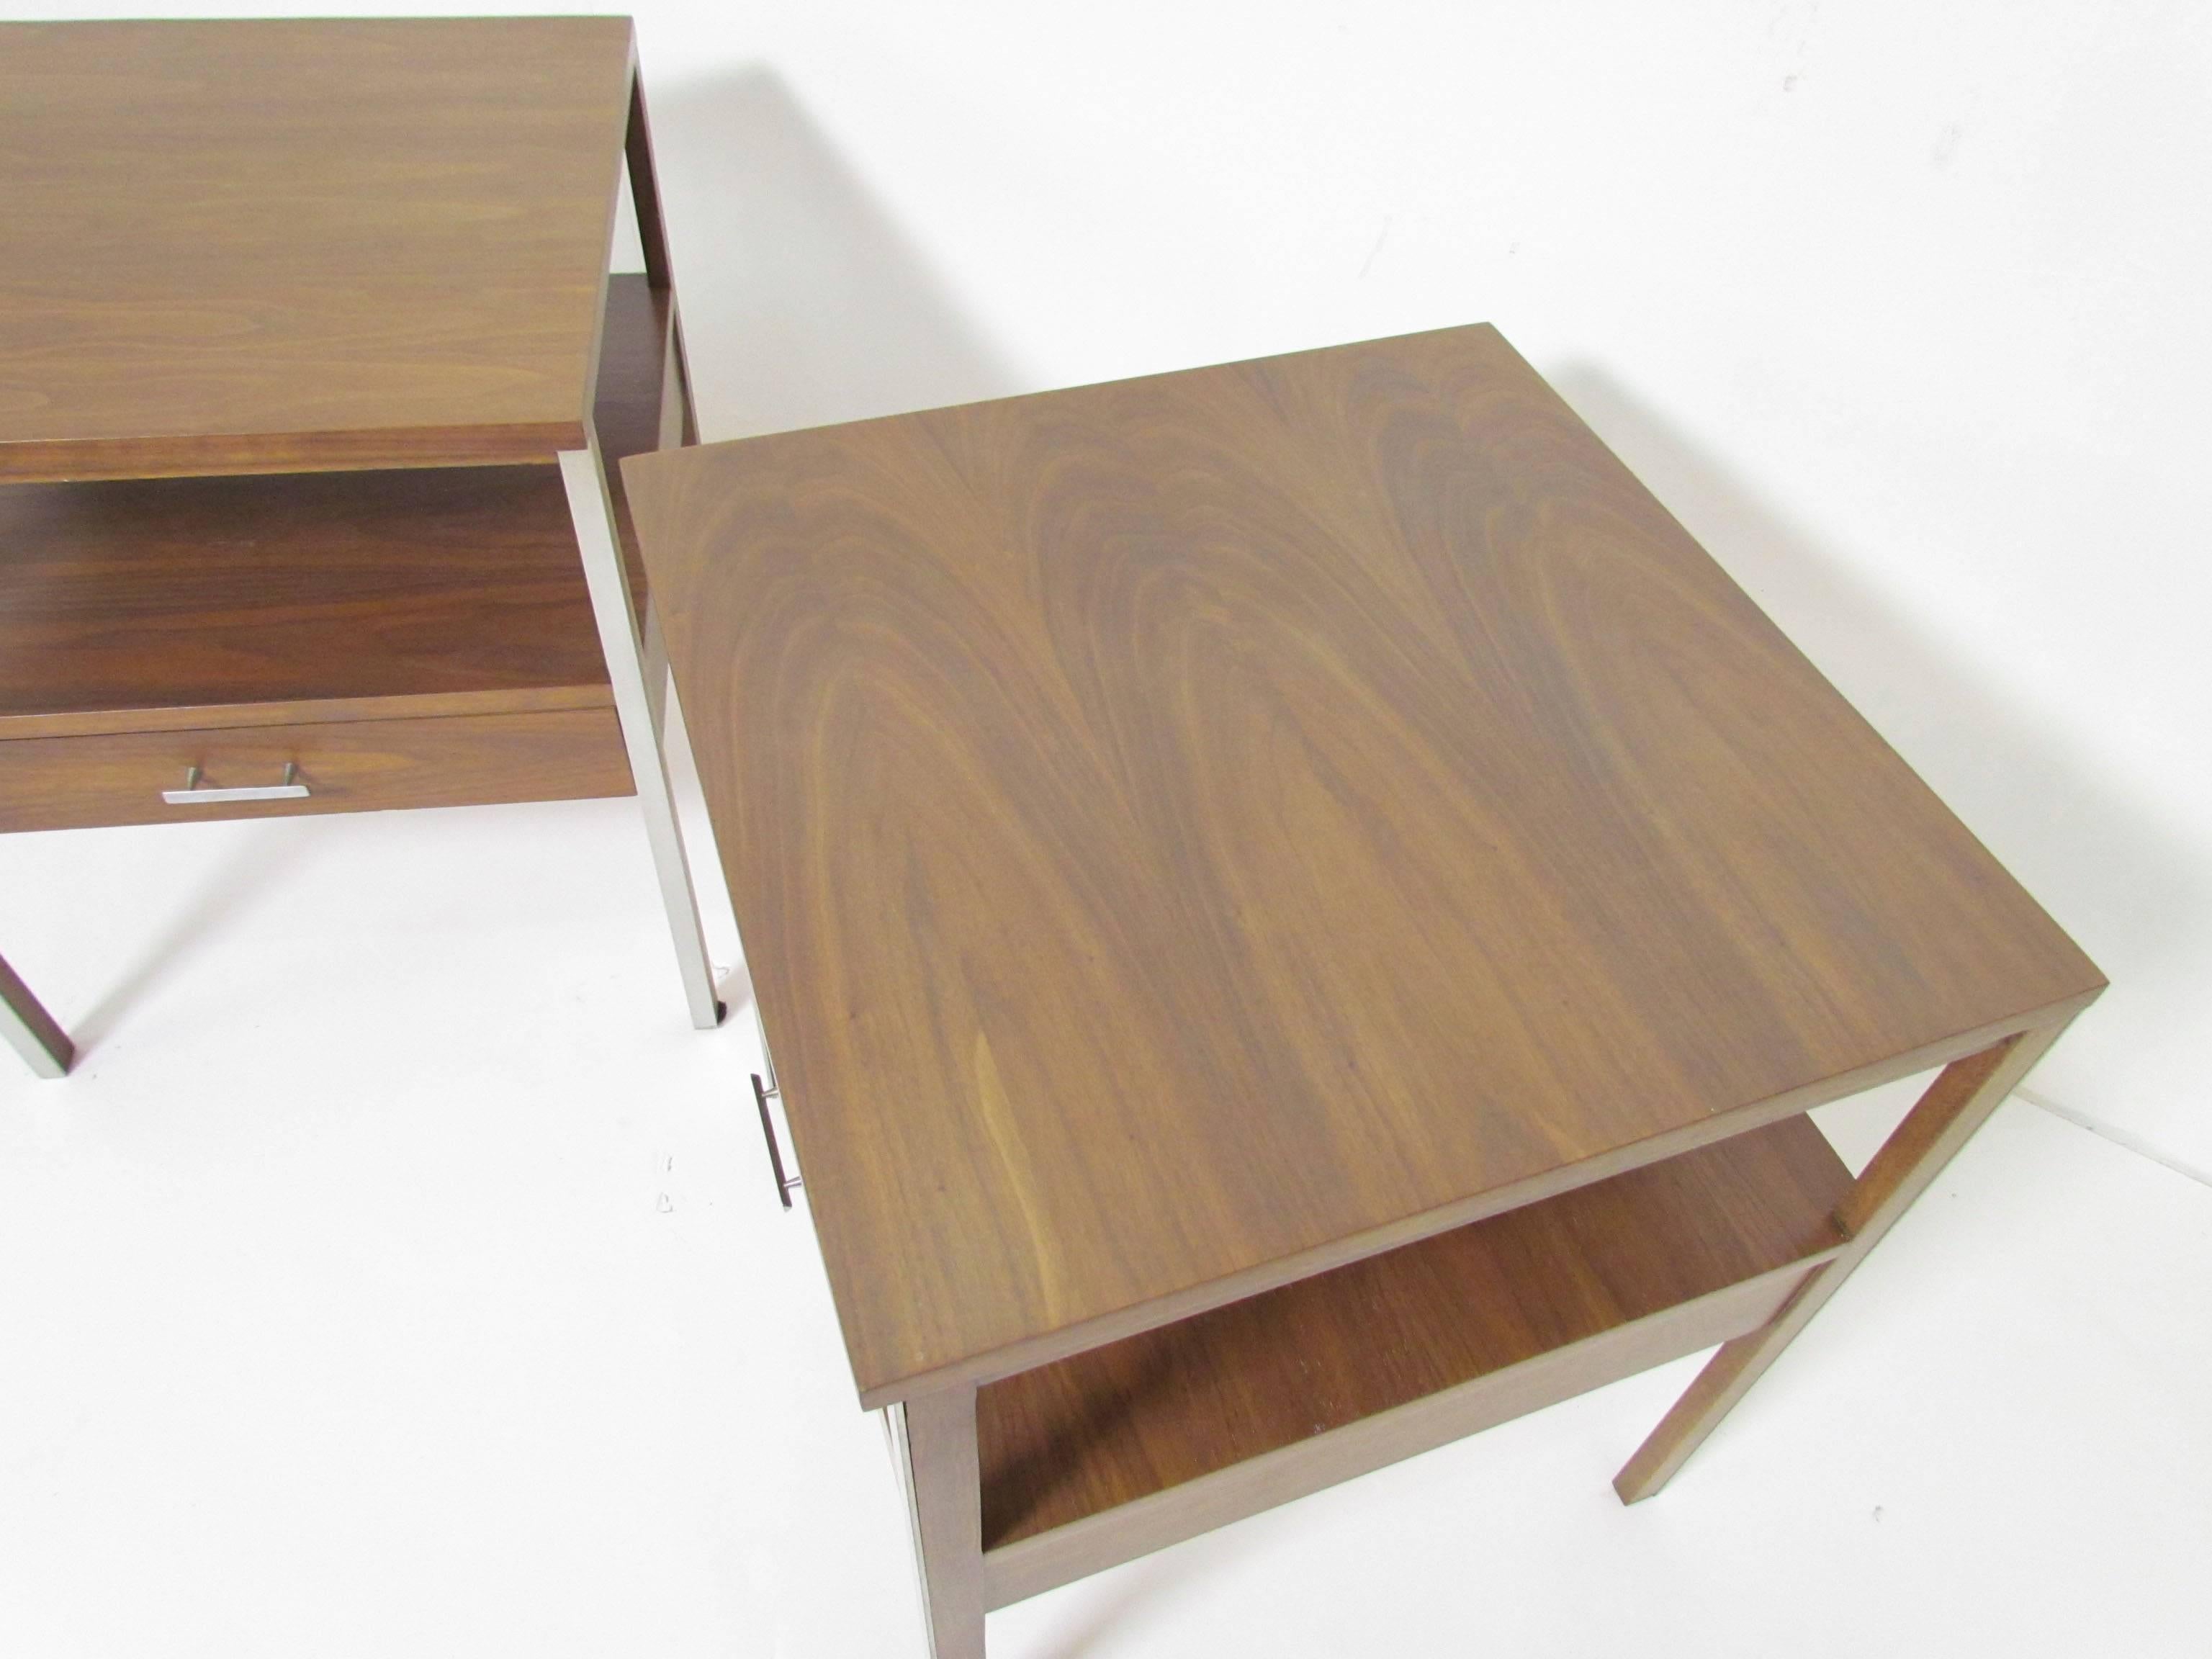 American Pair of End Tables or Nightstands by Paul McCobb for Calvin, circa 1950s